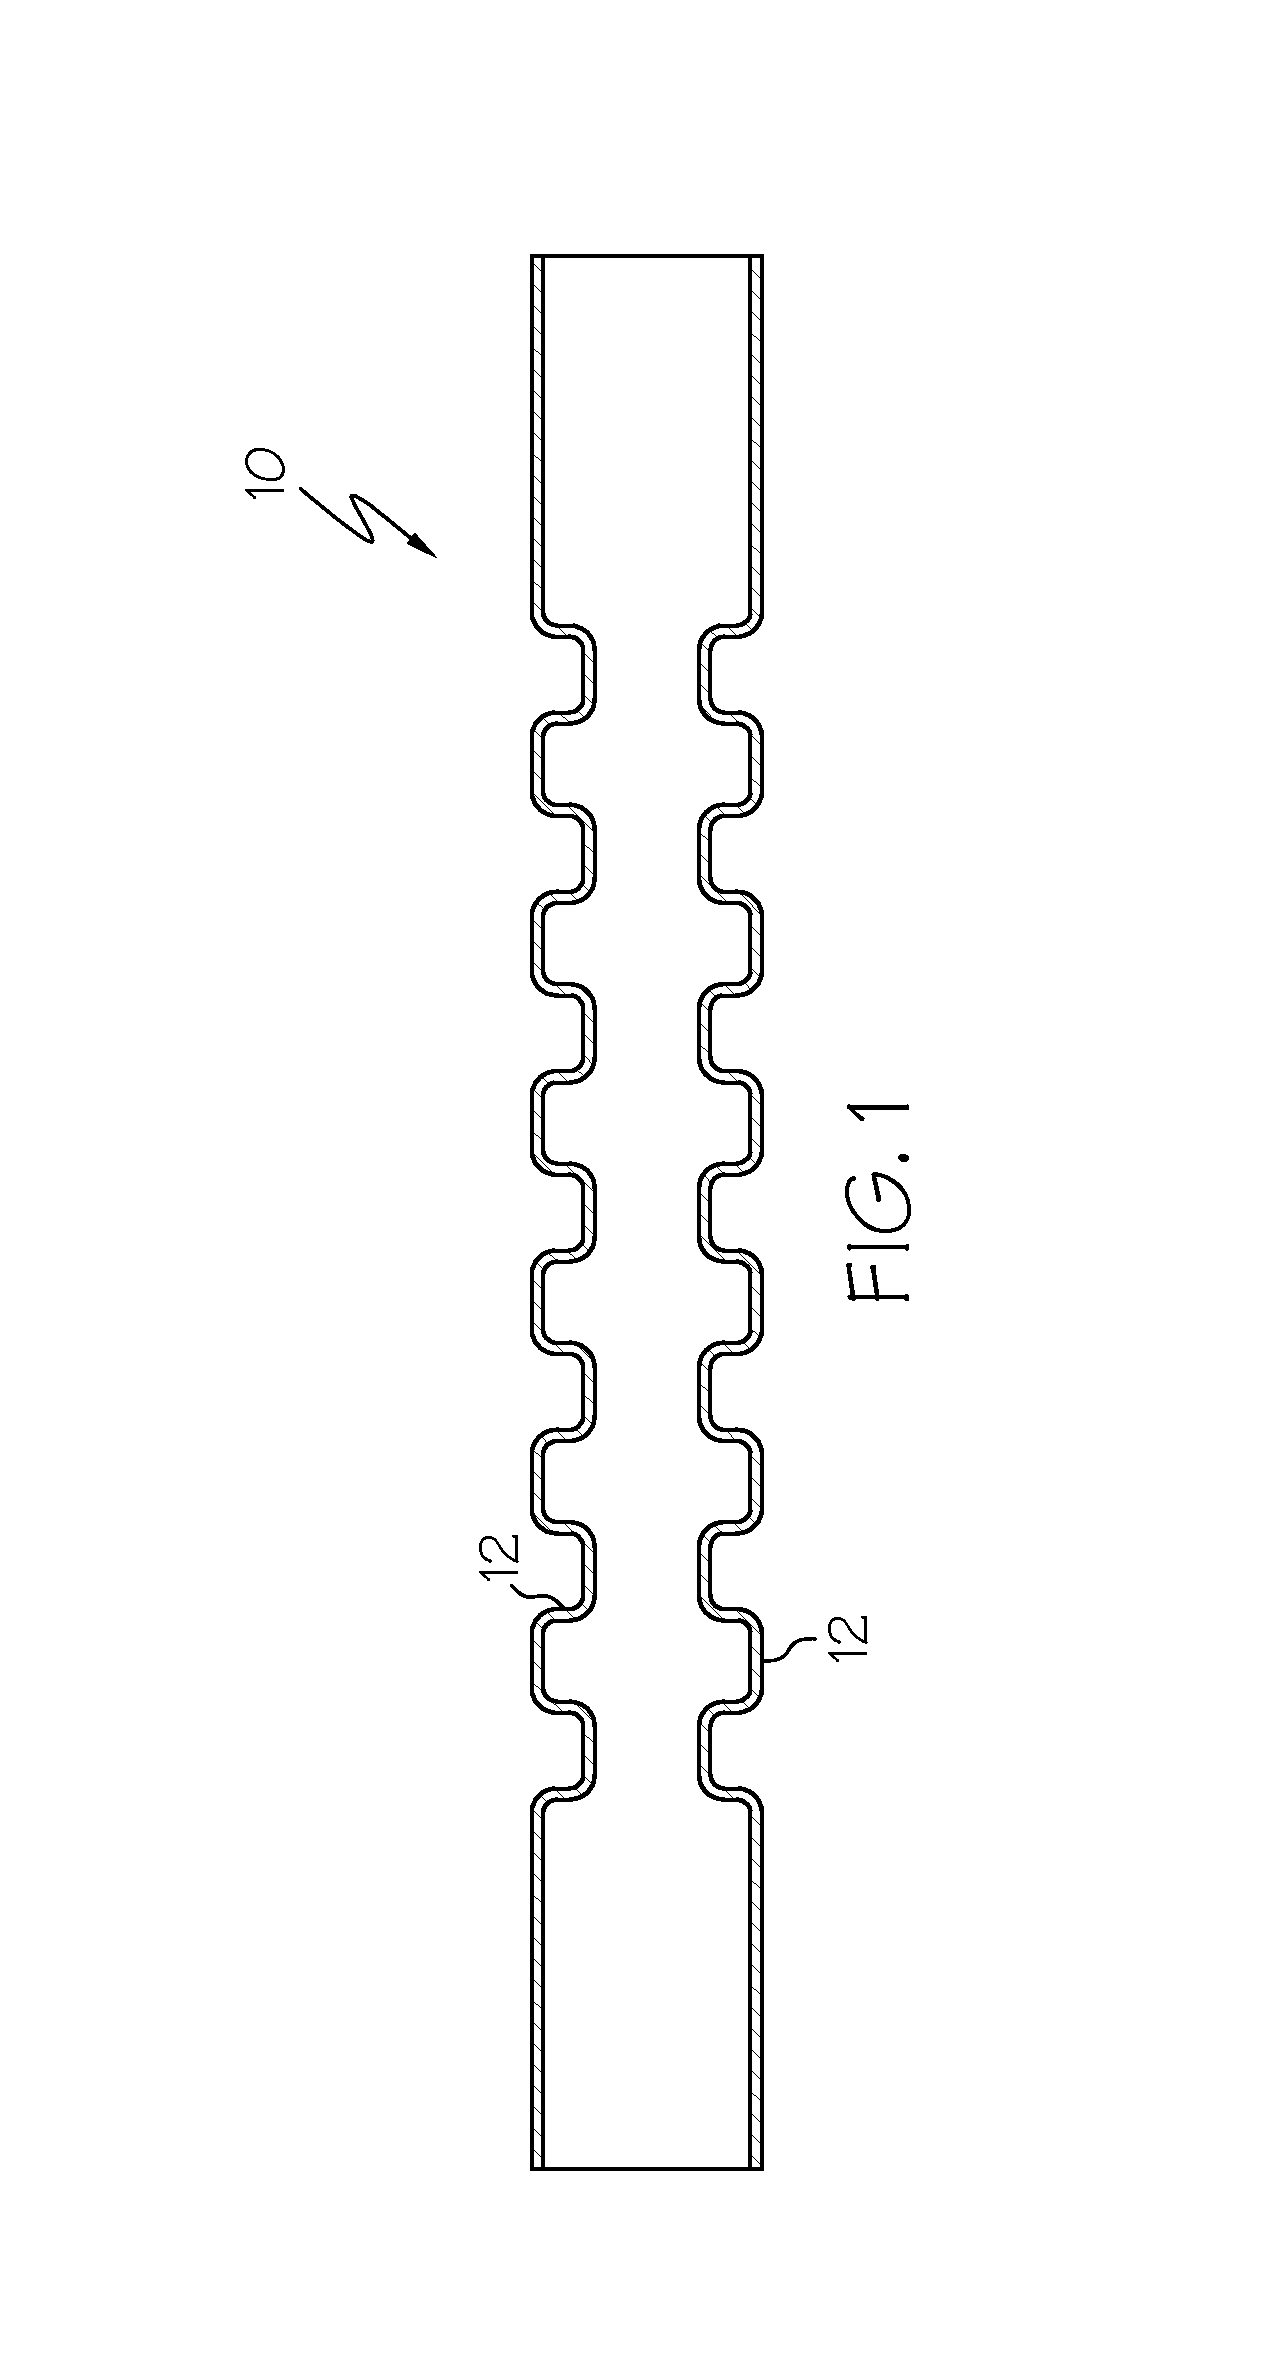 Method of depositing durable thin gold coating on fuel cell bipolar plates